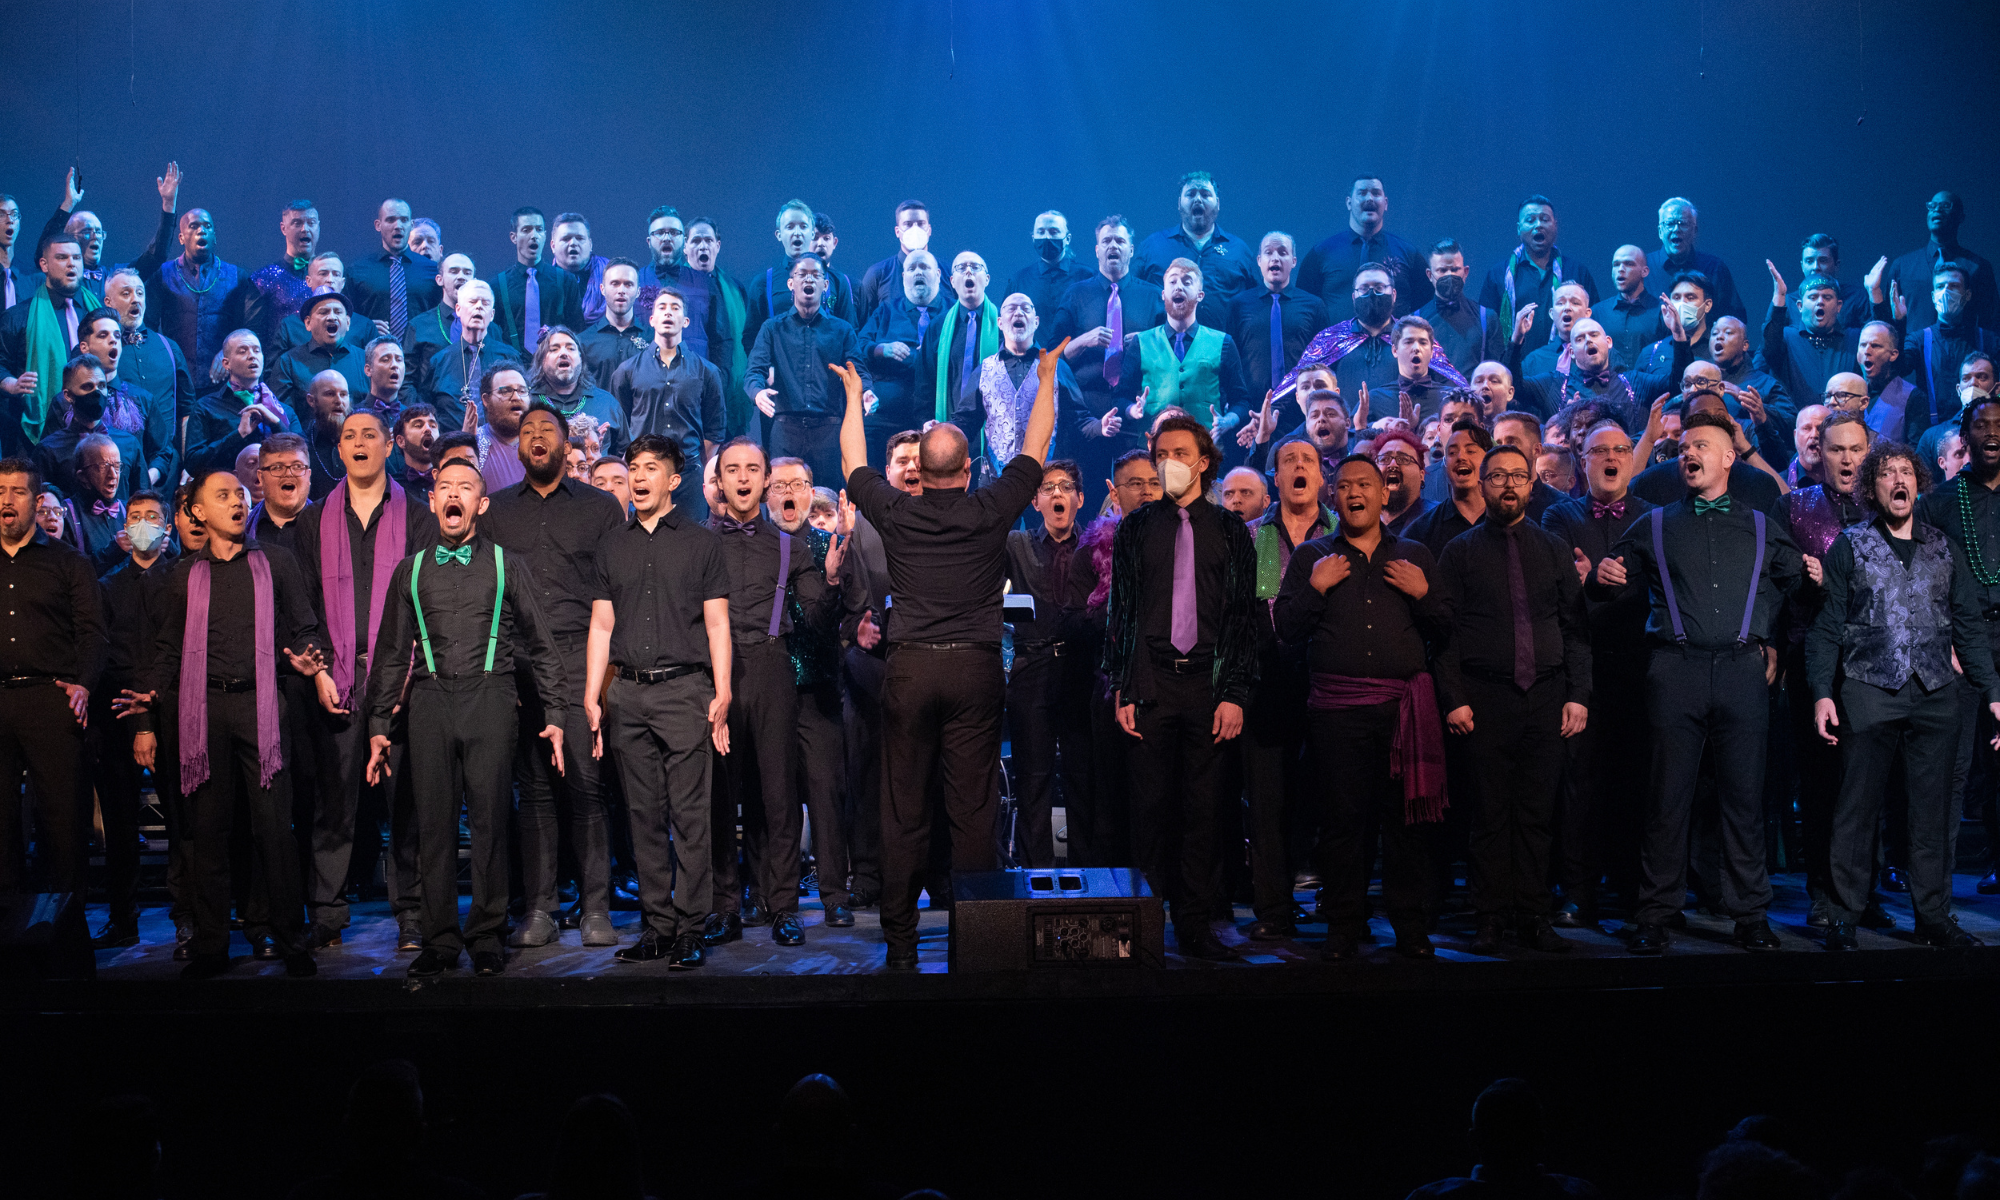 Picture of the chorus performing together onstage; members are dressed in all blacks with pops of green and purple color. Their mouths are open in song. The conductor stands at the front and center, back to the audience, arms stretched upward.